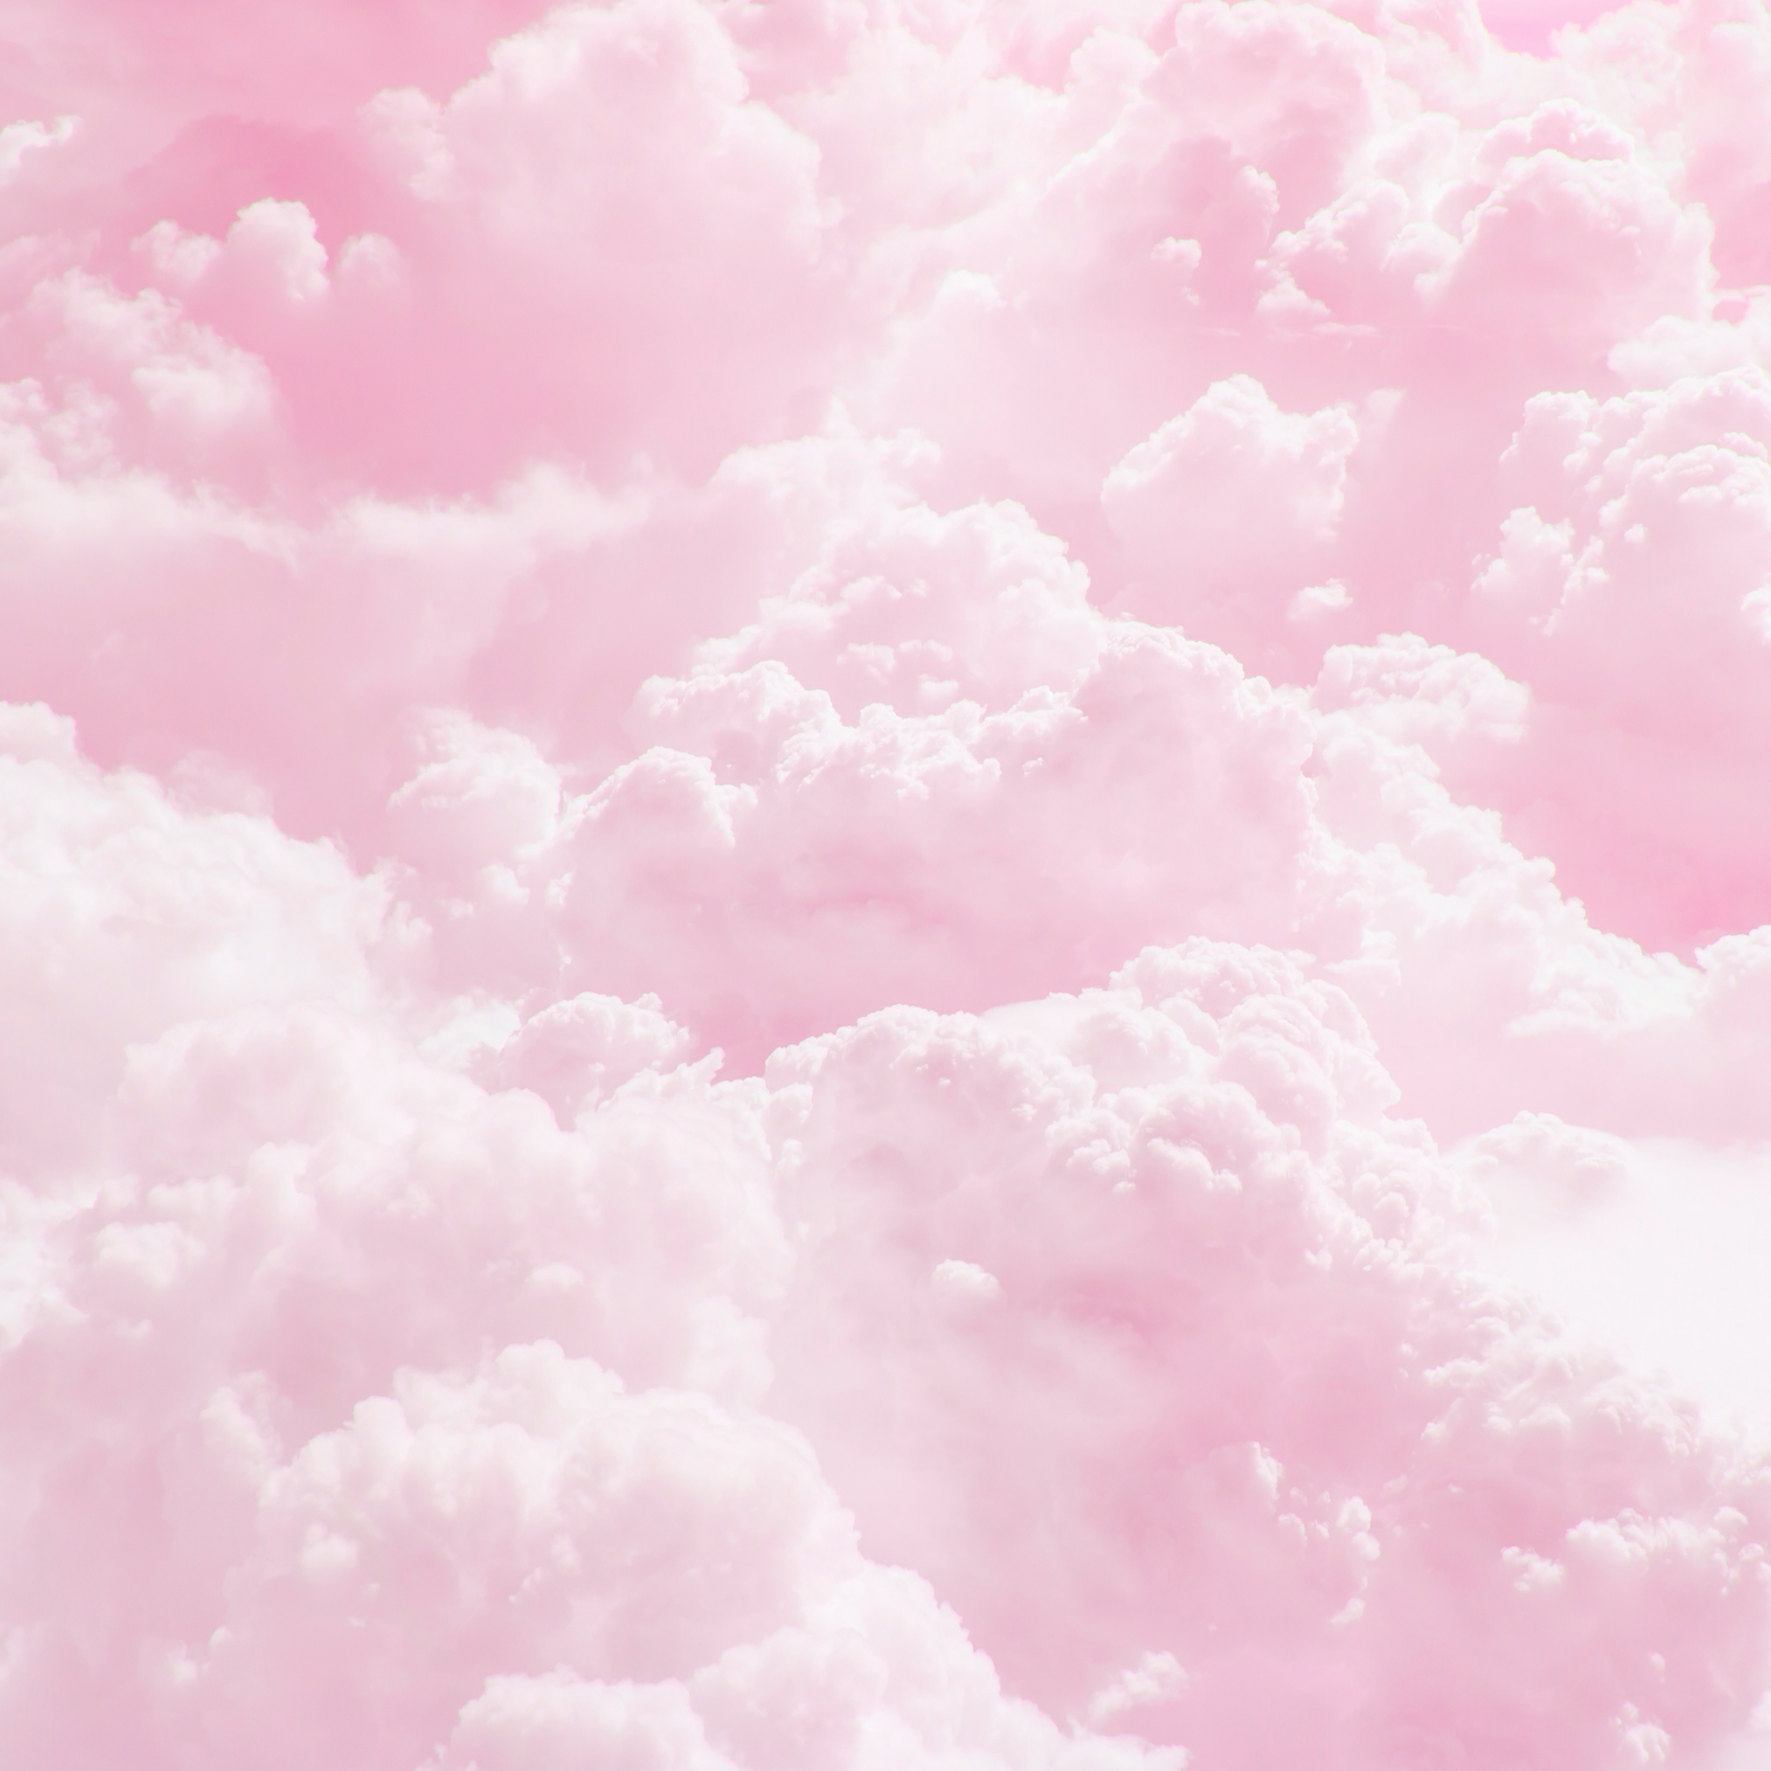 This visual is about pinkclouds pink clouds rosa nubes freetoedit #pinkclou...